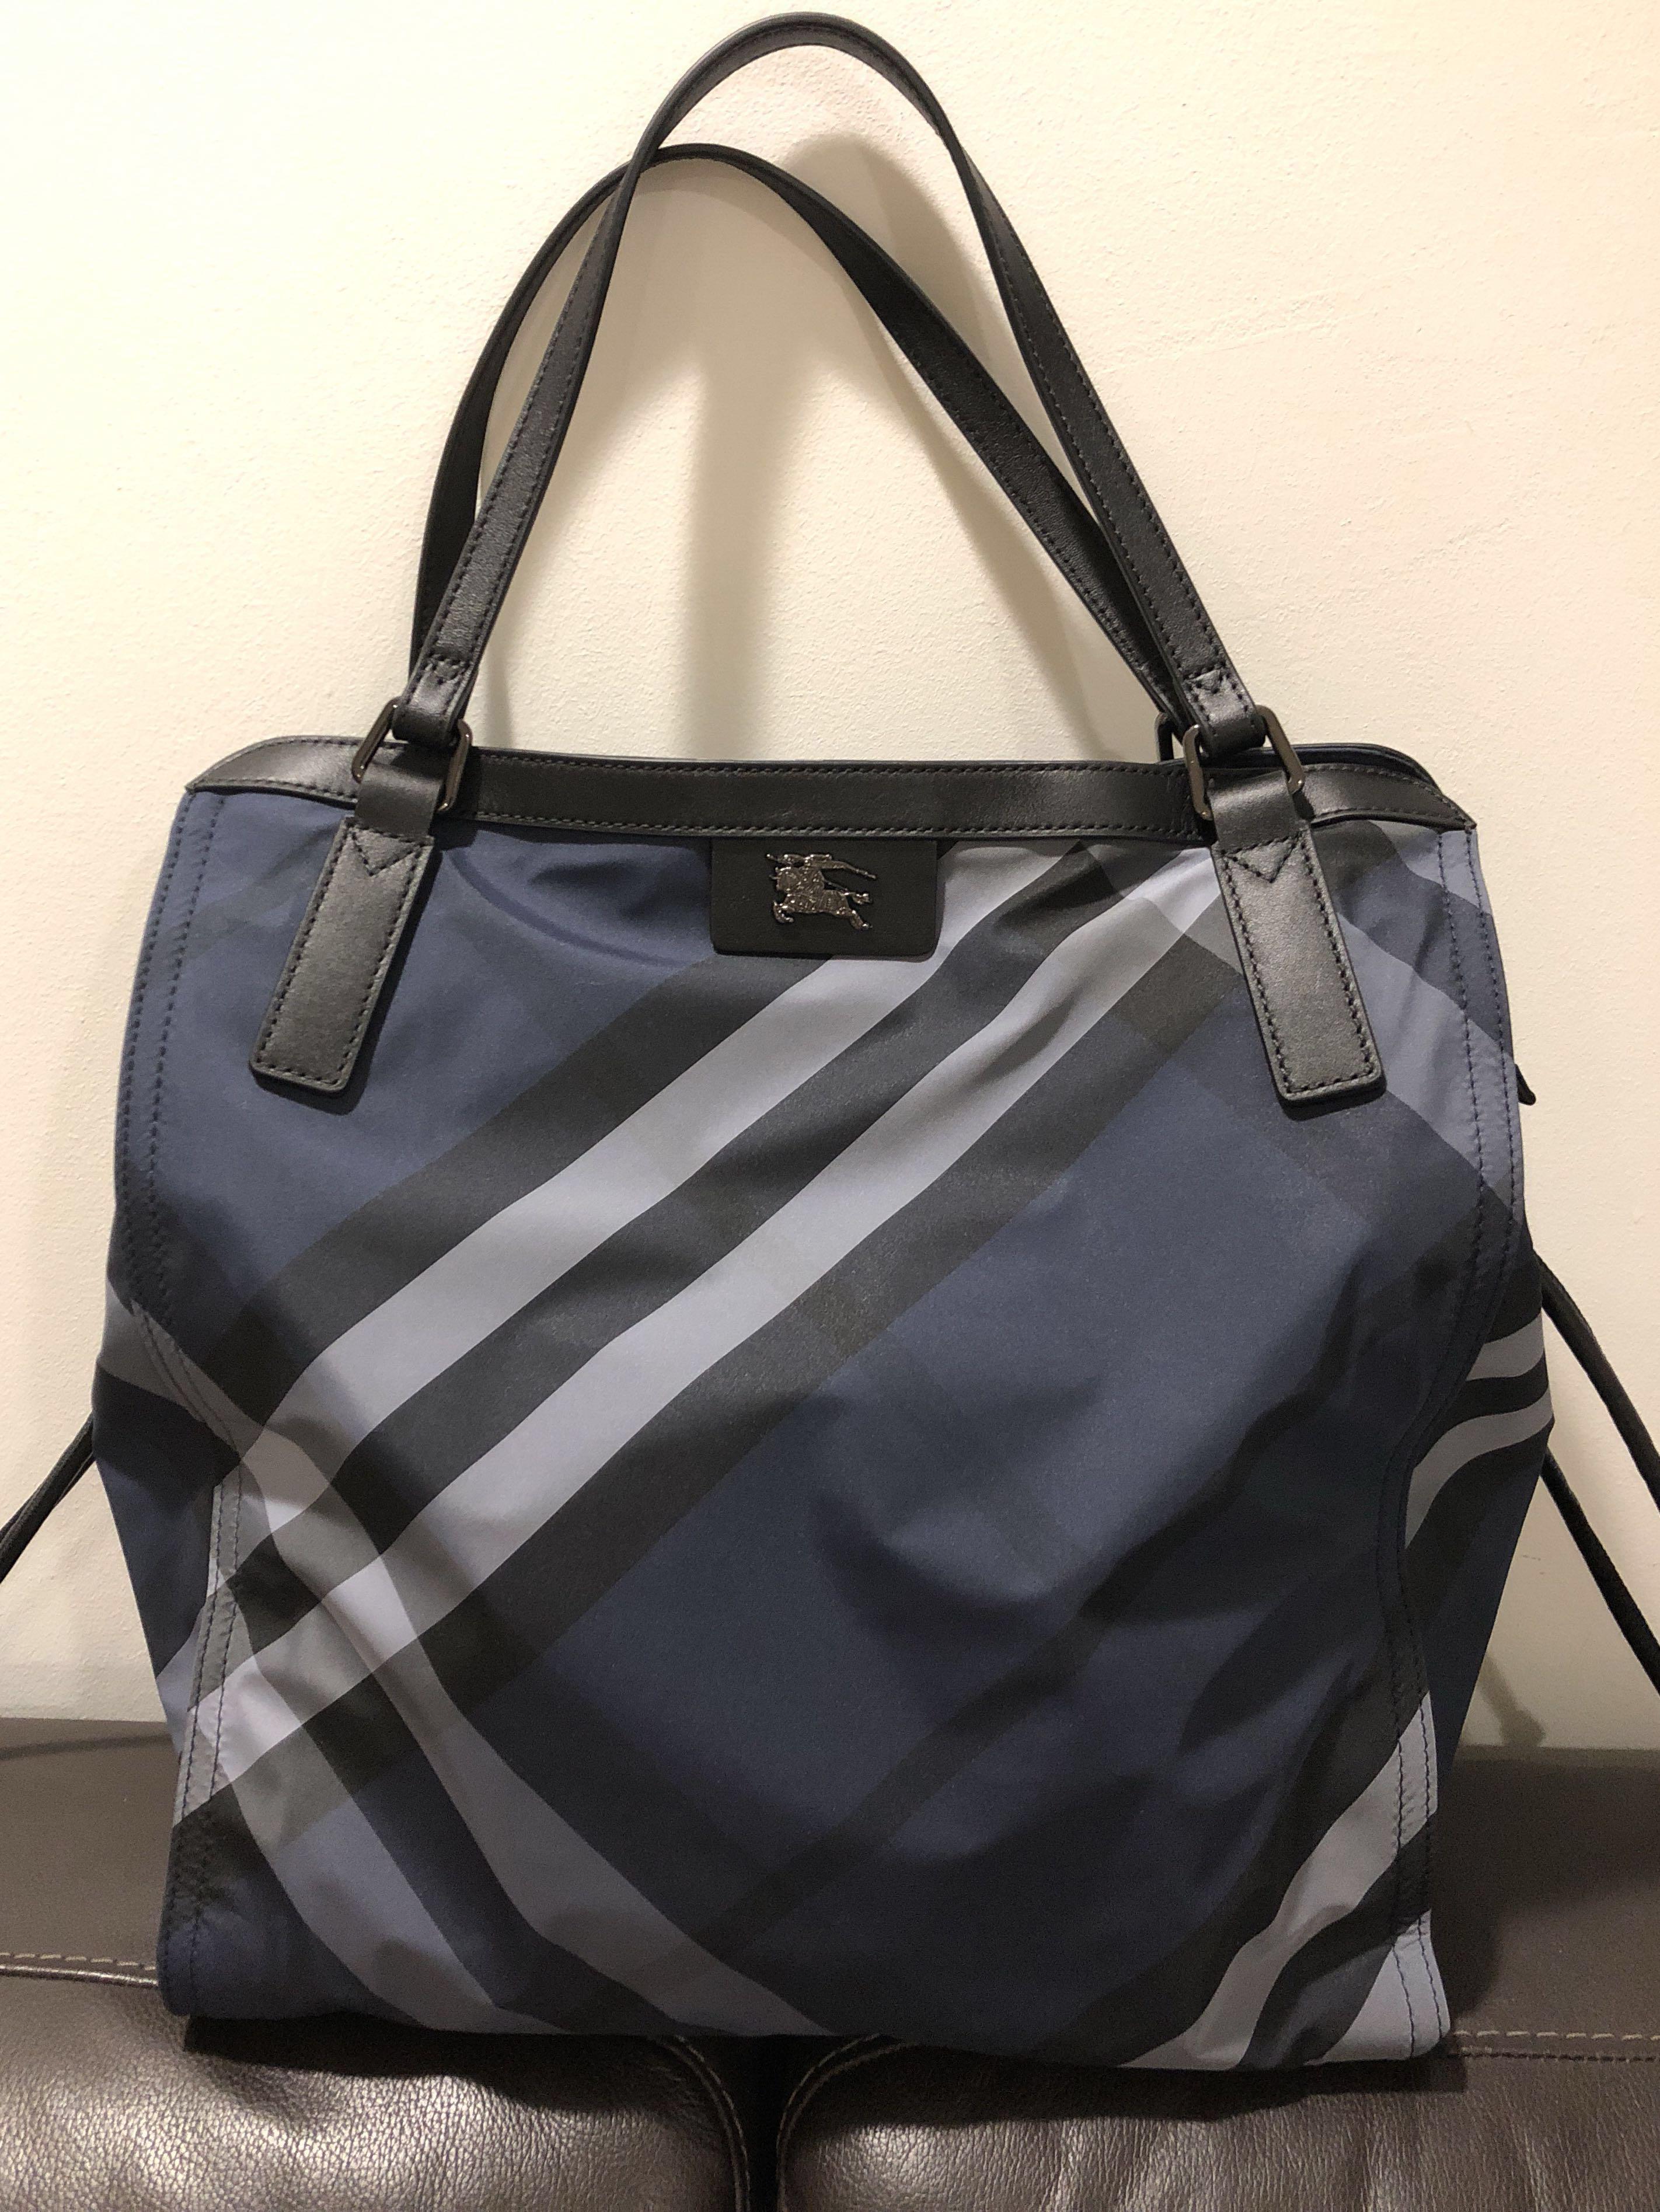 burberry packable tote